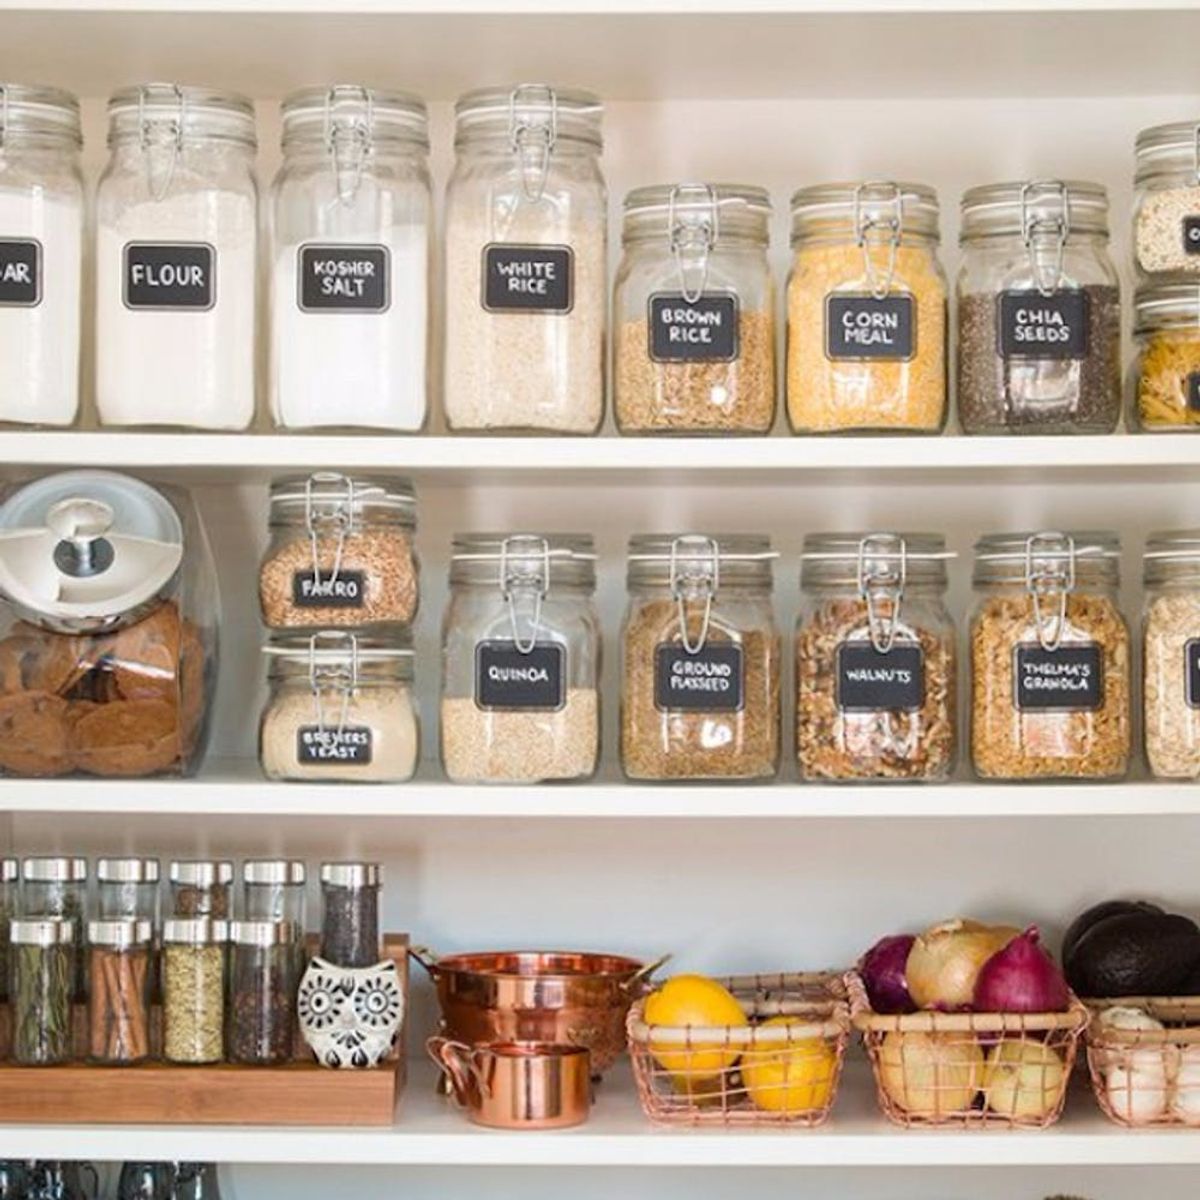 4 Simple Steps to Organizing Your Pantry Like a Pro